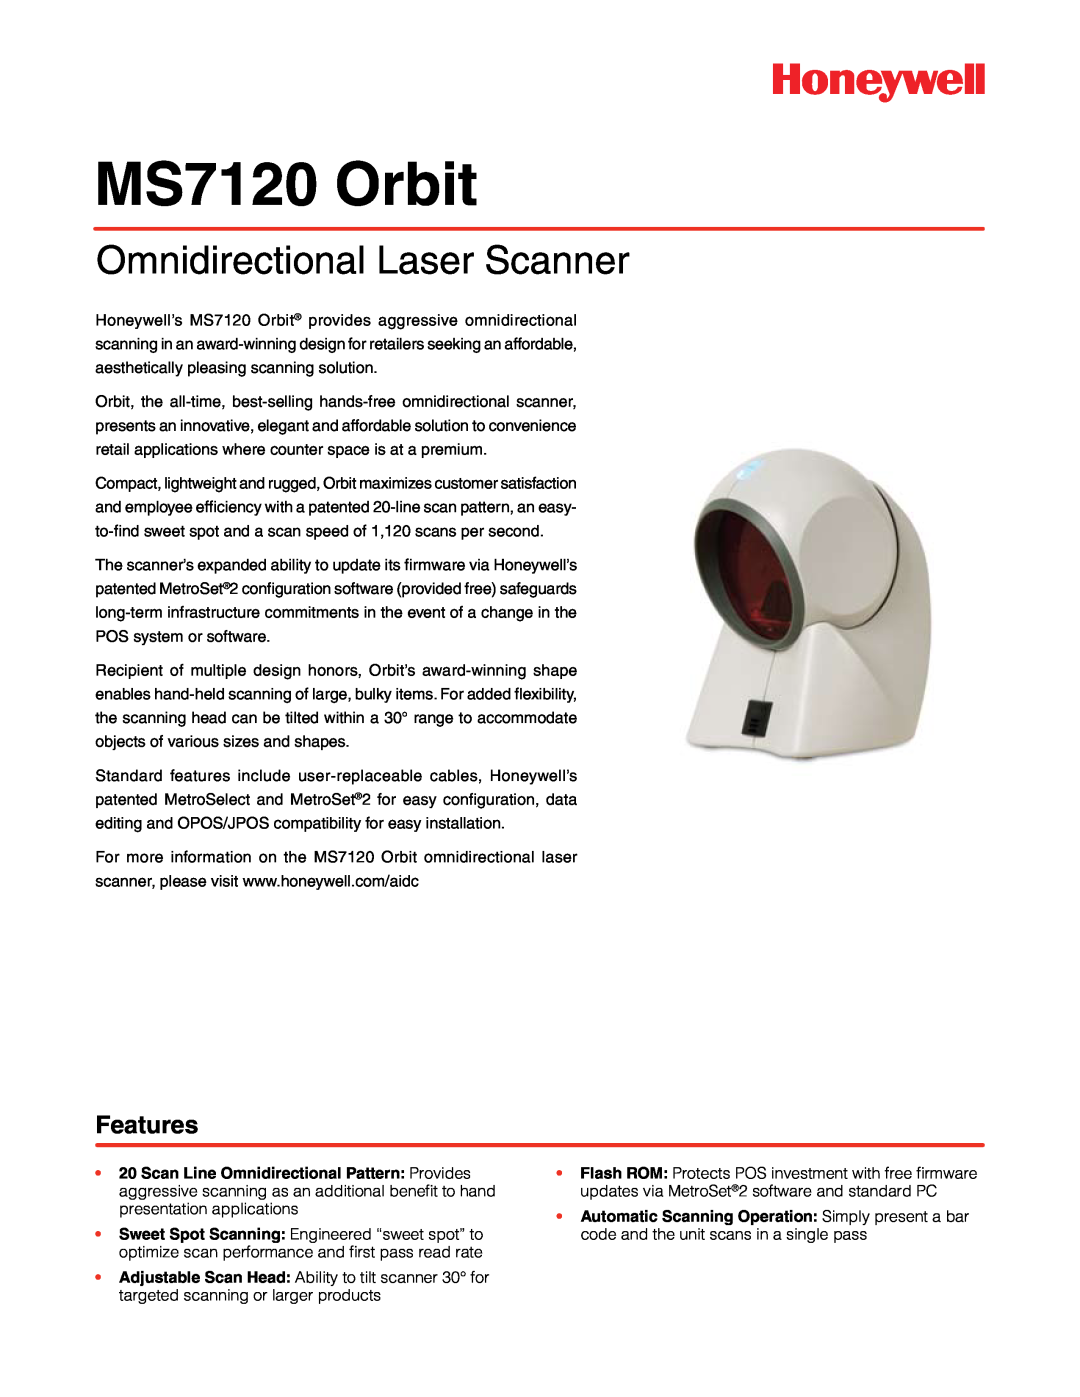 Hand Held Products manual MS7120 Orbit, Omnidirectional Laser Scanner, Features 